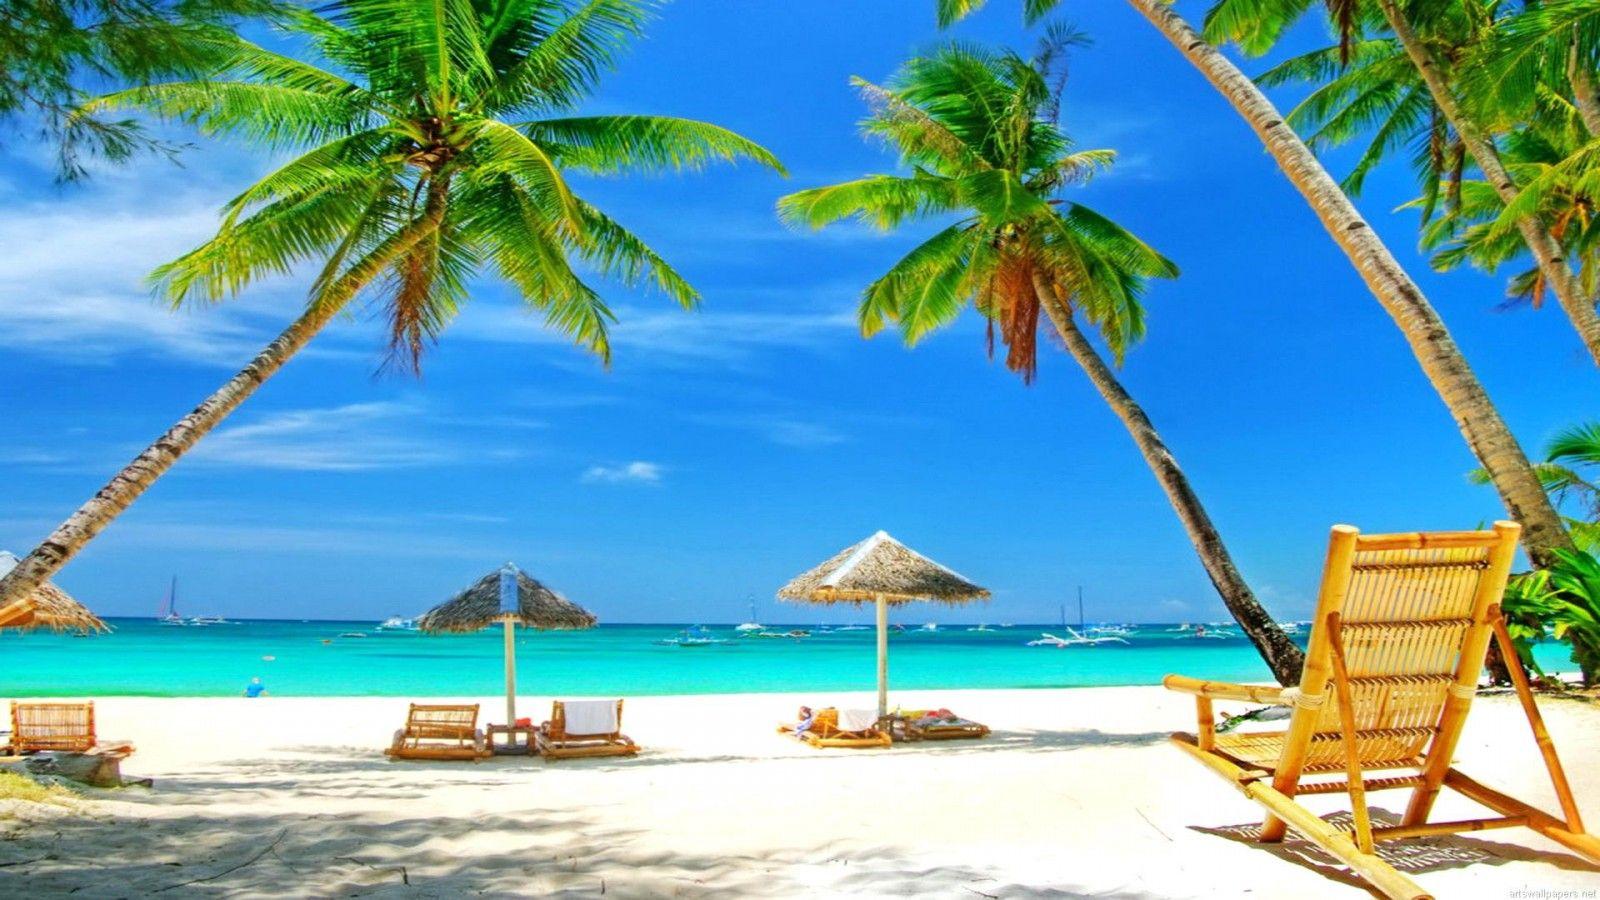 Free Image Of Beach Scenes. The best beaches in the world